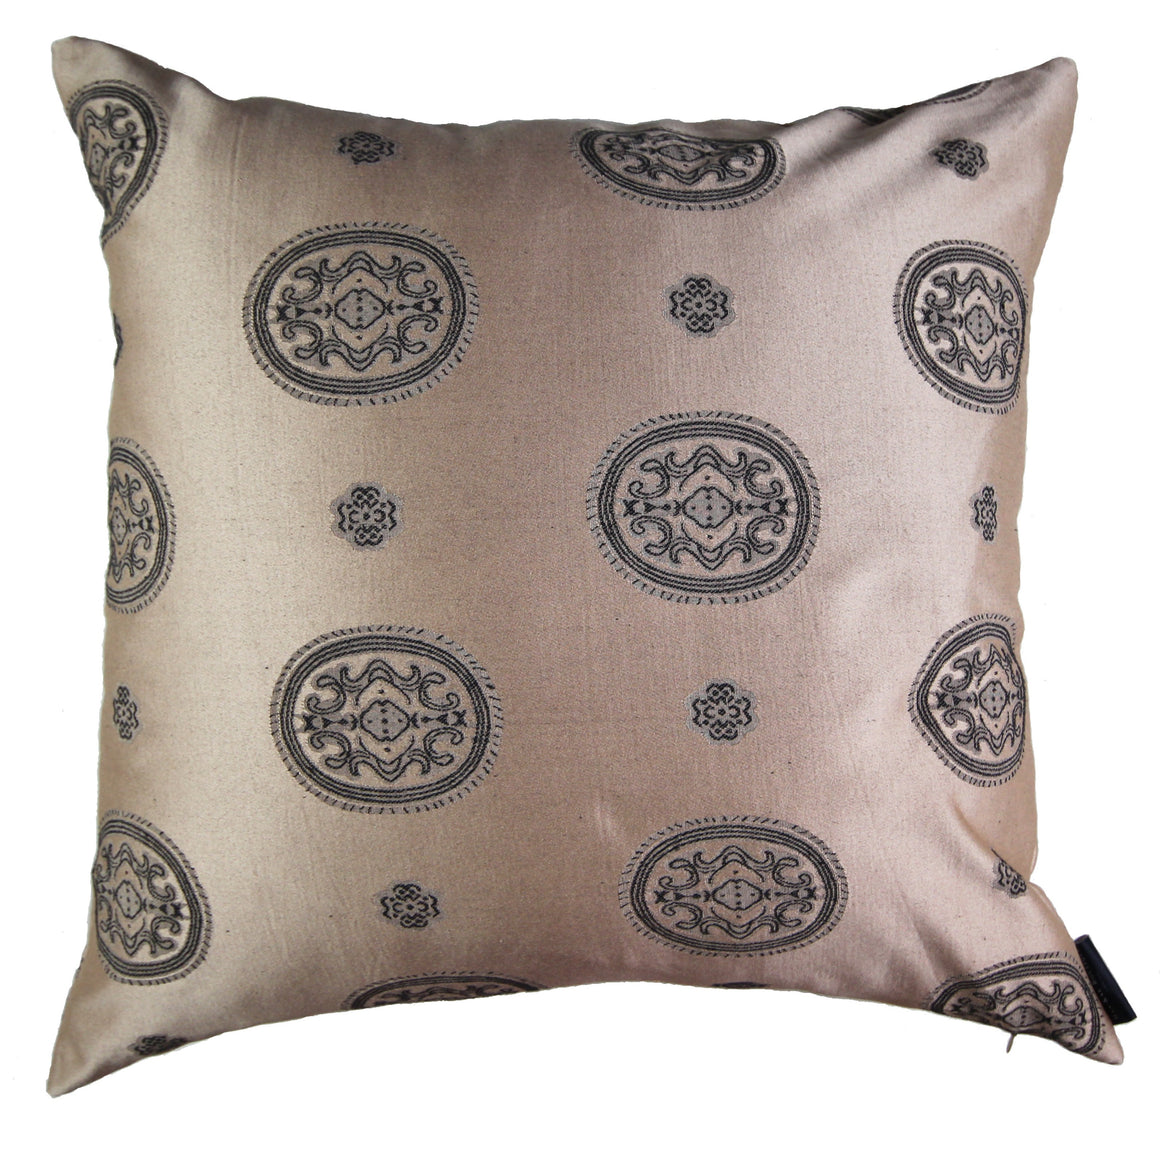 Amelie - Light Brown with Geometrical Egg-Shaped Motifs Pillow Cover - 22x22